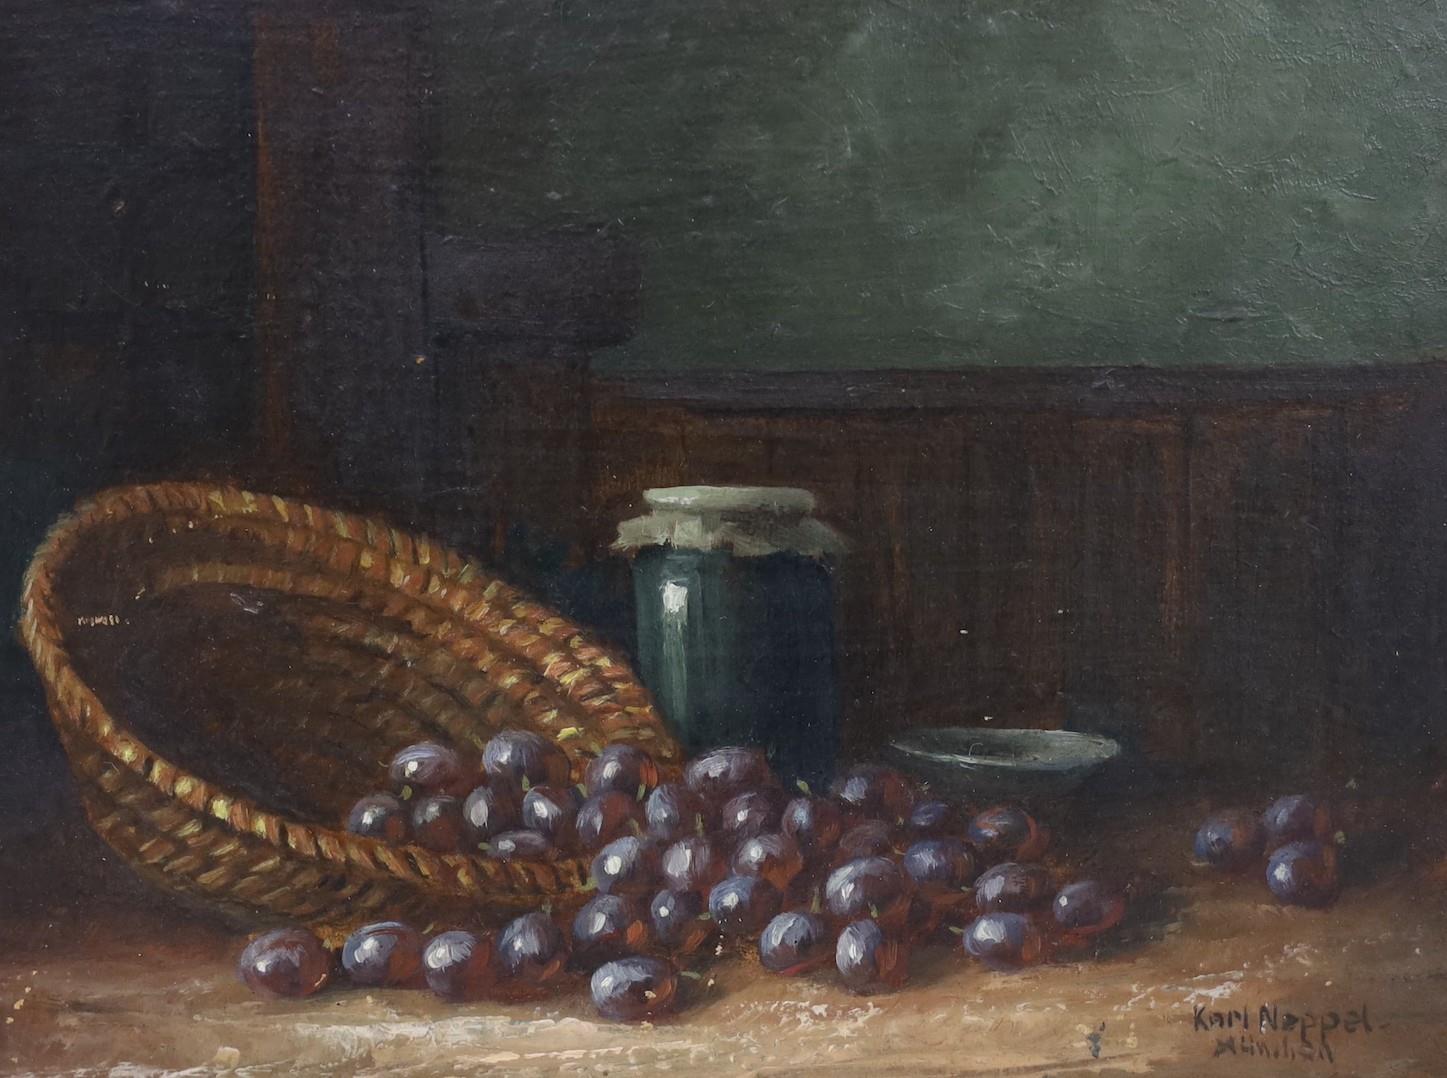 Karl Neppel (German, 1883-1961), oil on board, Still life of grapes on a table top, signed, 13 x